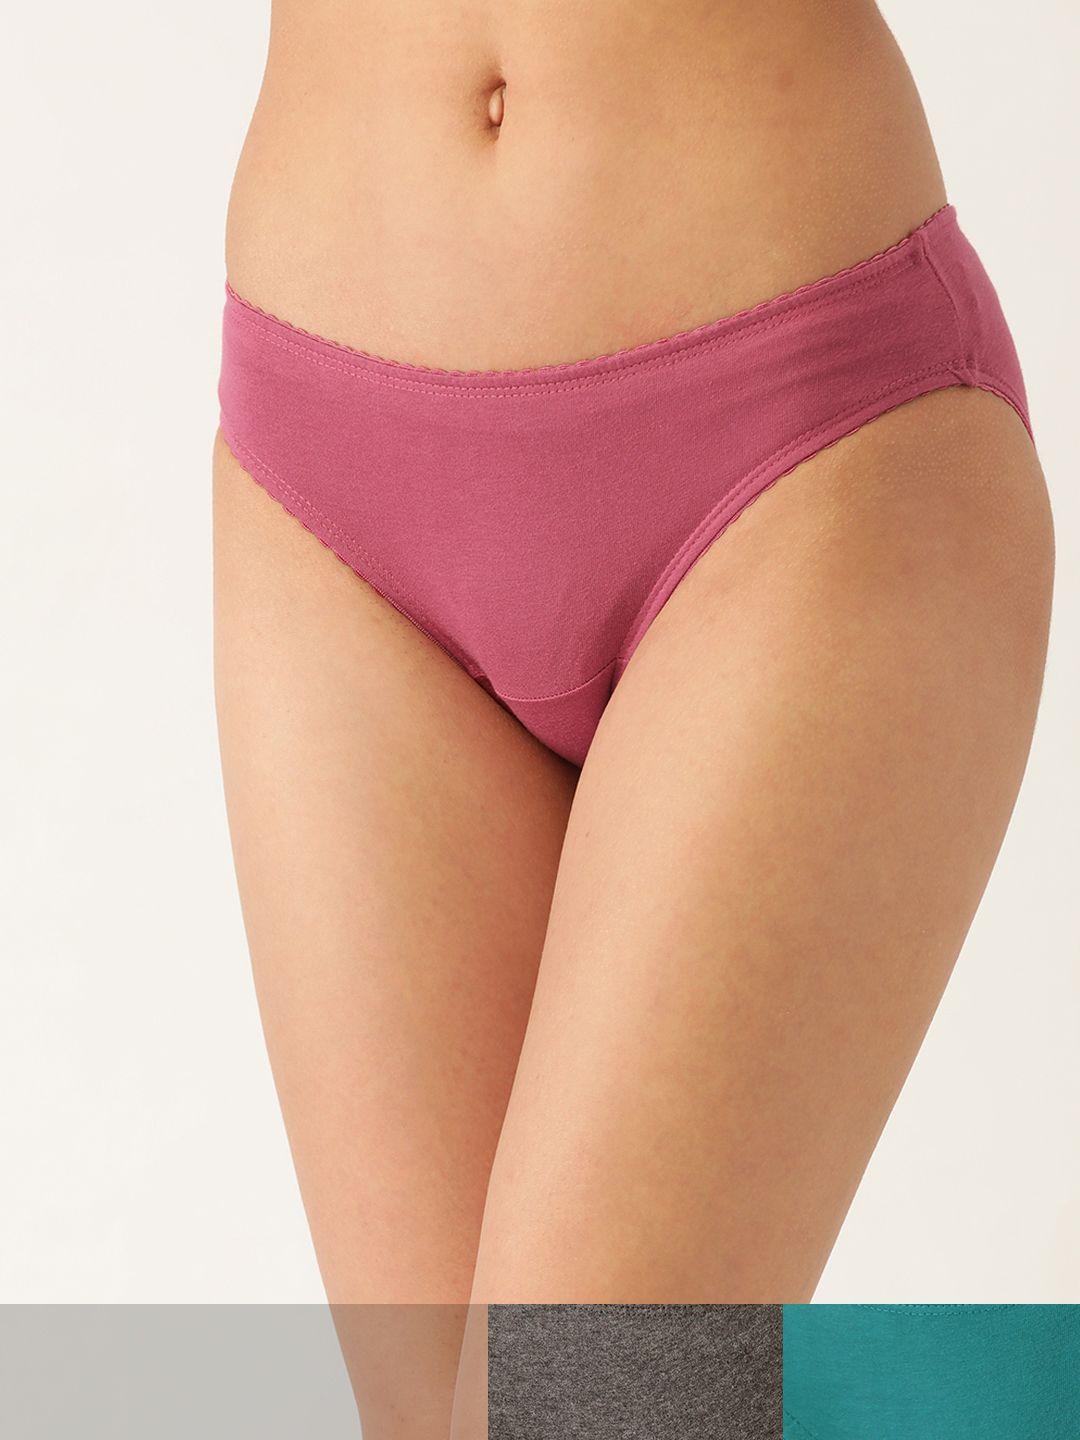 dressberry-women-pack-of-3-pure-cotton-solid-hipster-briefs-db-3xs-sol-brf-009